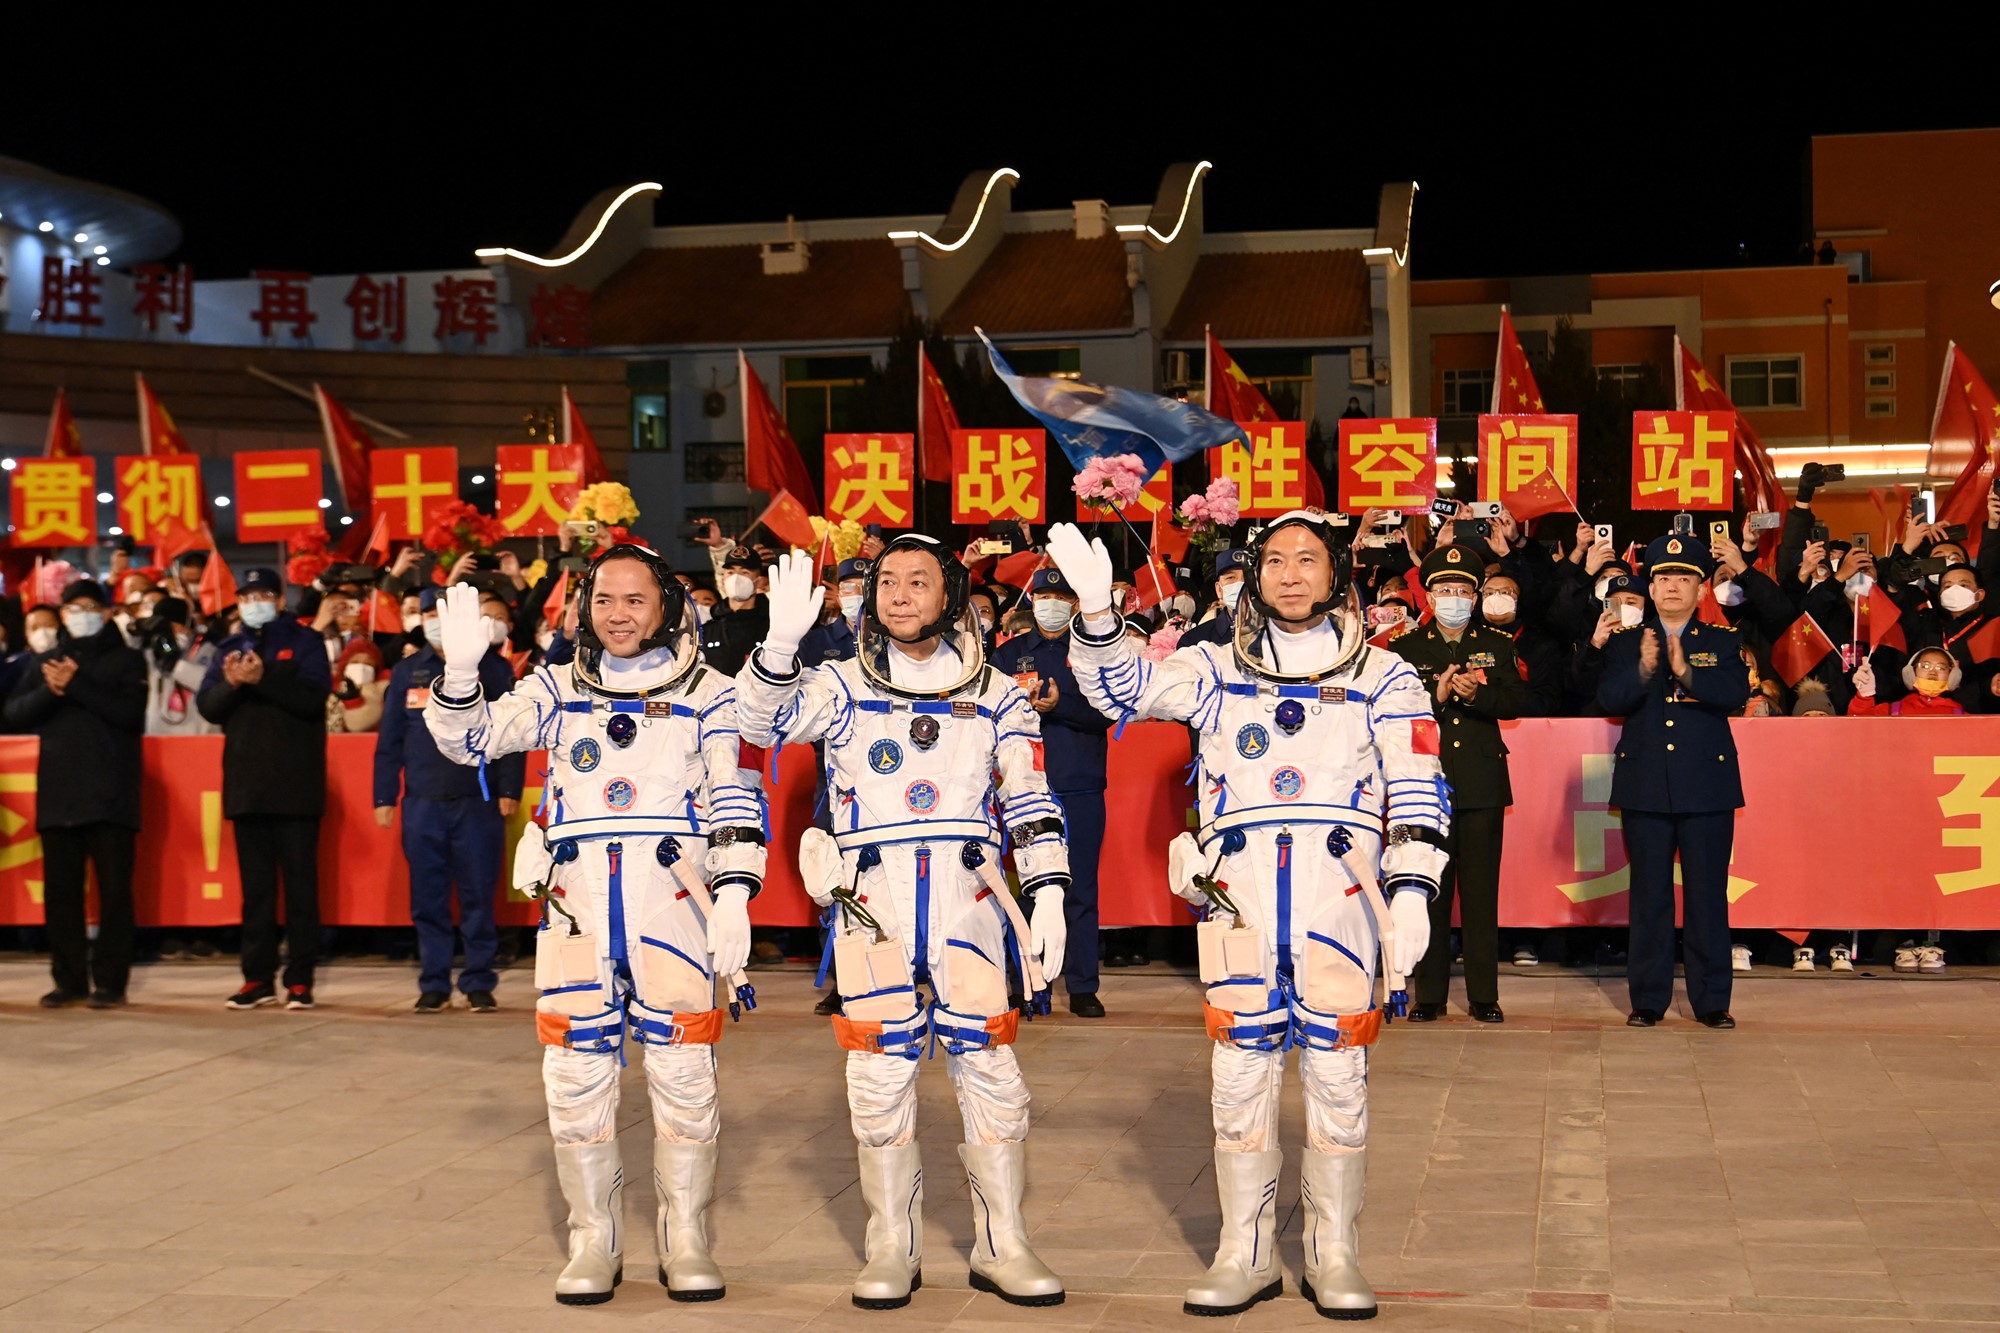 Astronauts Fei Junlong, Deng Qingming and Zhang Lu attend a see-off ceremony before the Shenzhou-15 spaceflight mission to build China's space station, at Jiuquan Satellite Launch Center